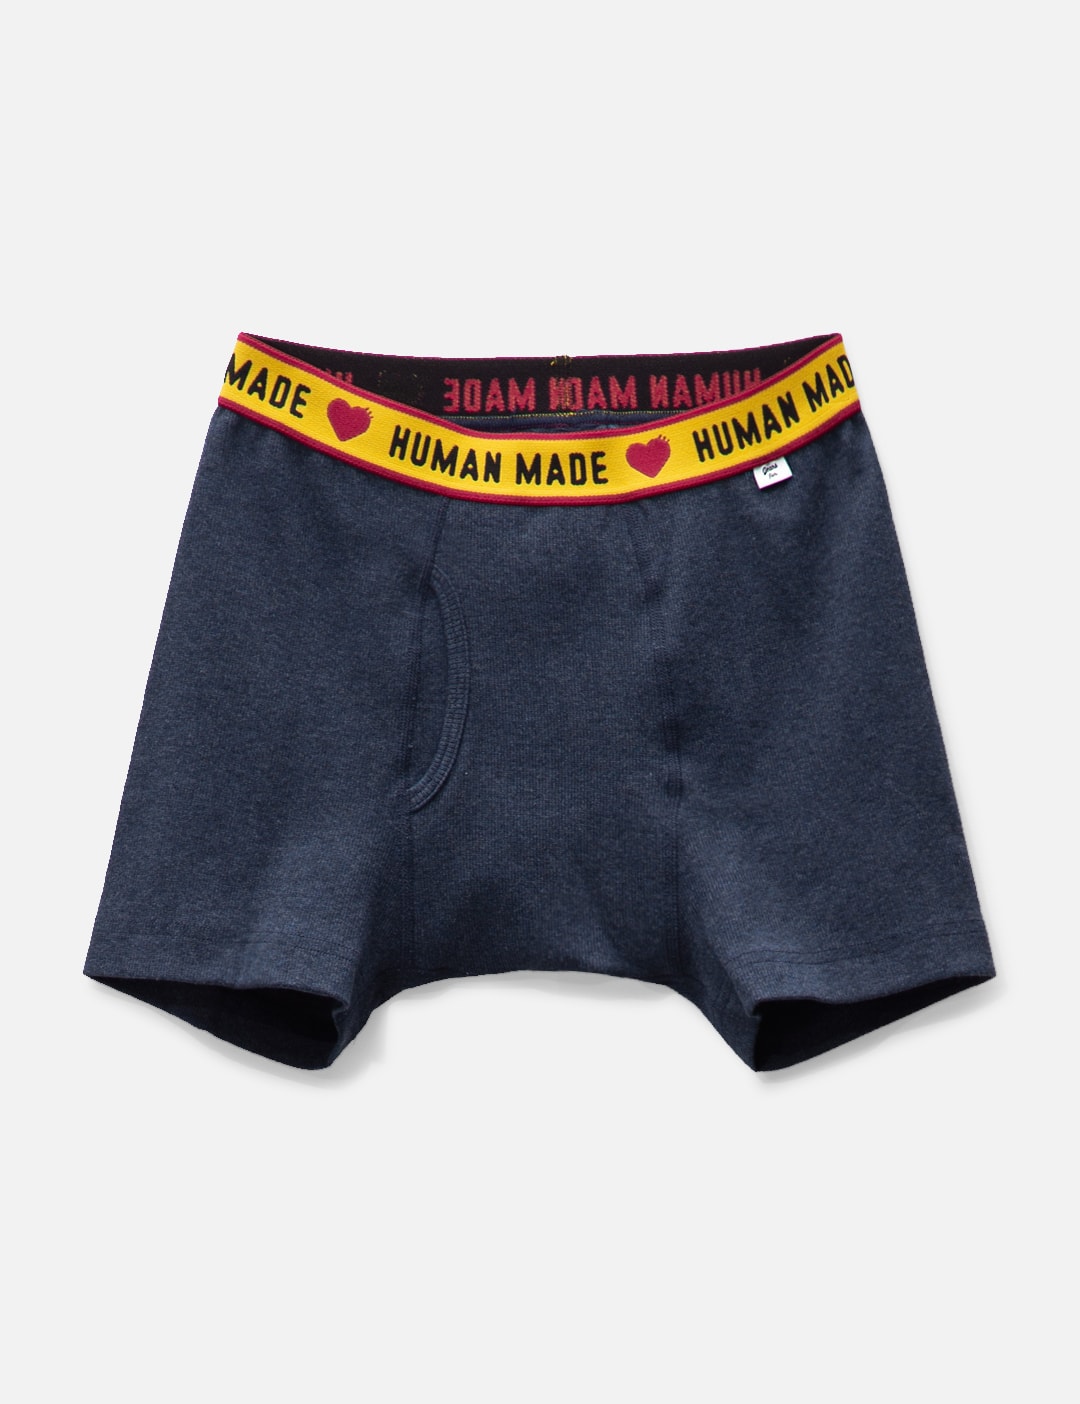 Human Made - HM BOXER BRIEFS | HBX - Globally Curated Fashion and ...